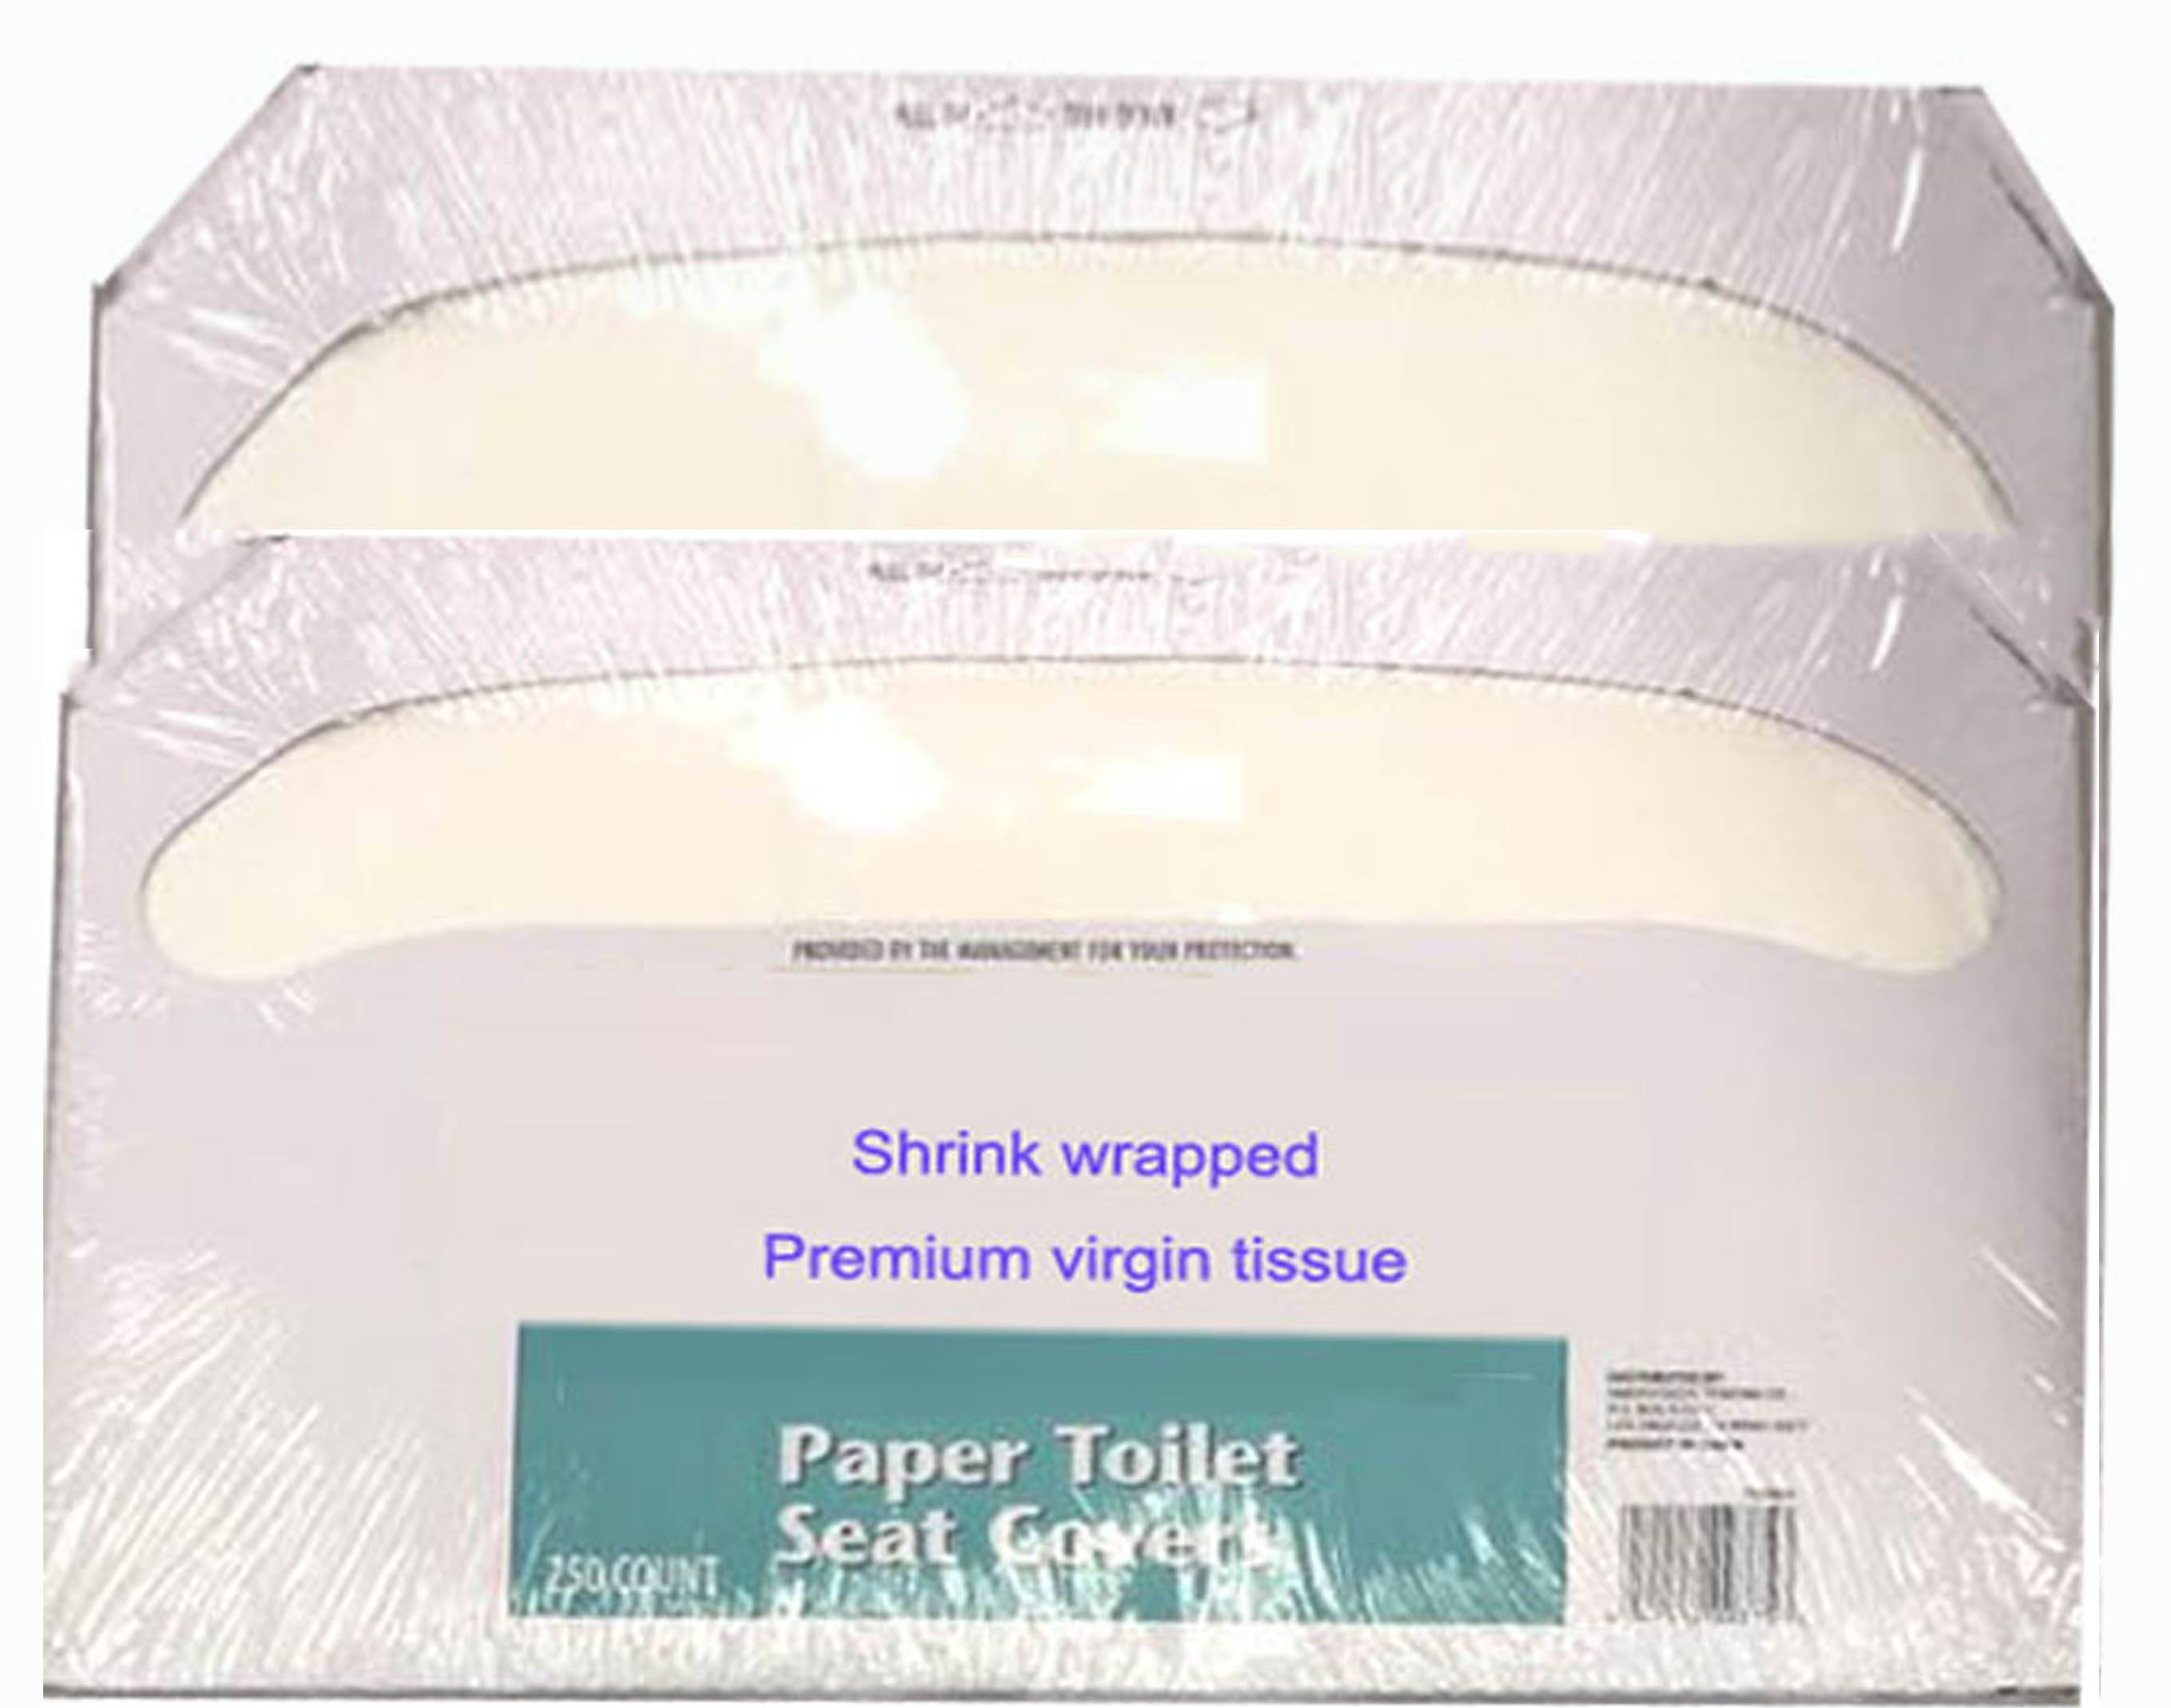 1/2 Fold Disposable Toilet Seat Cover Paper- Shrinked wrap type